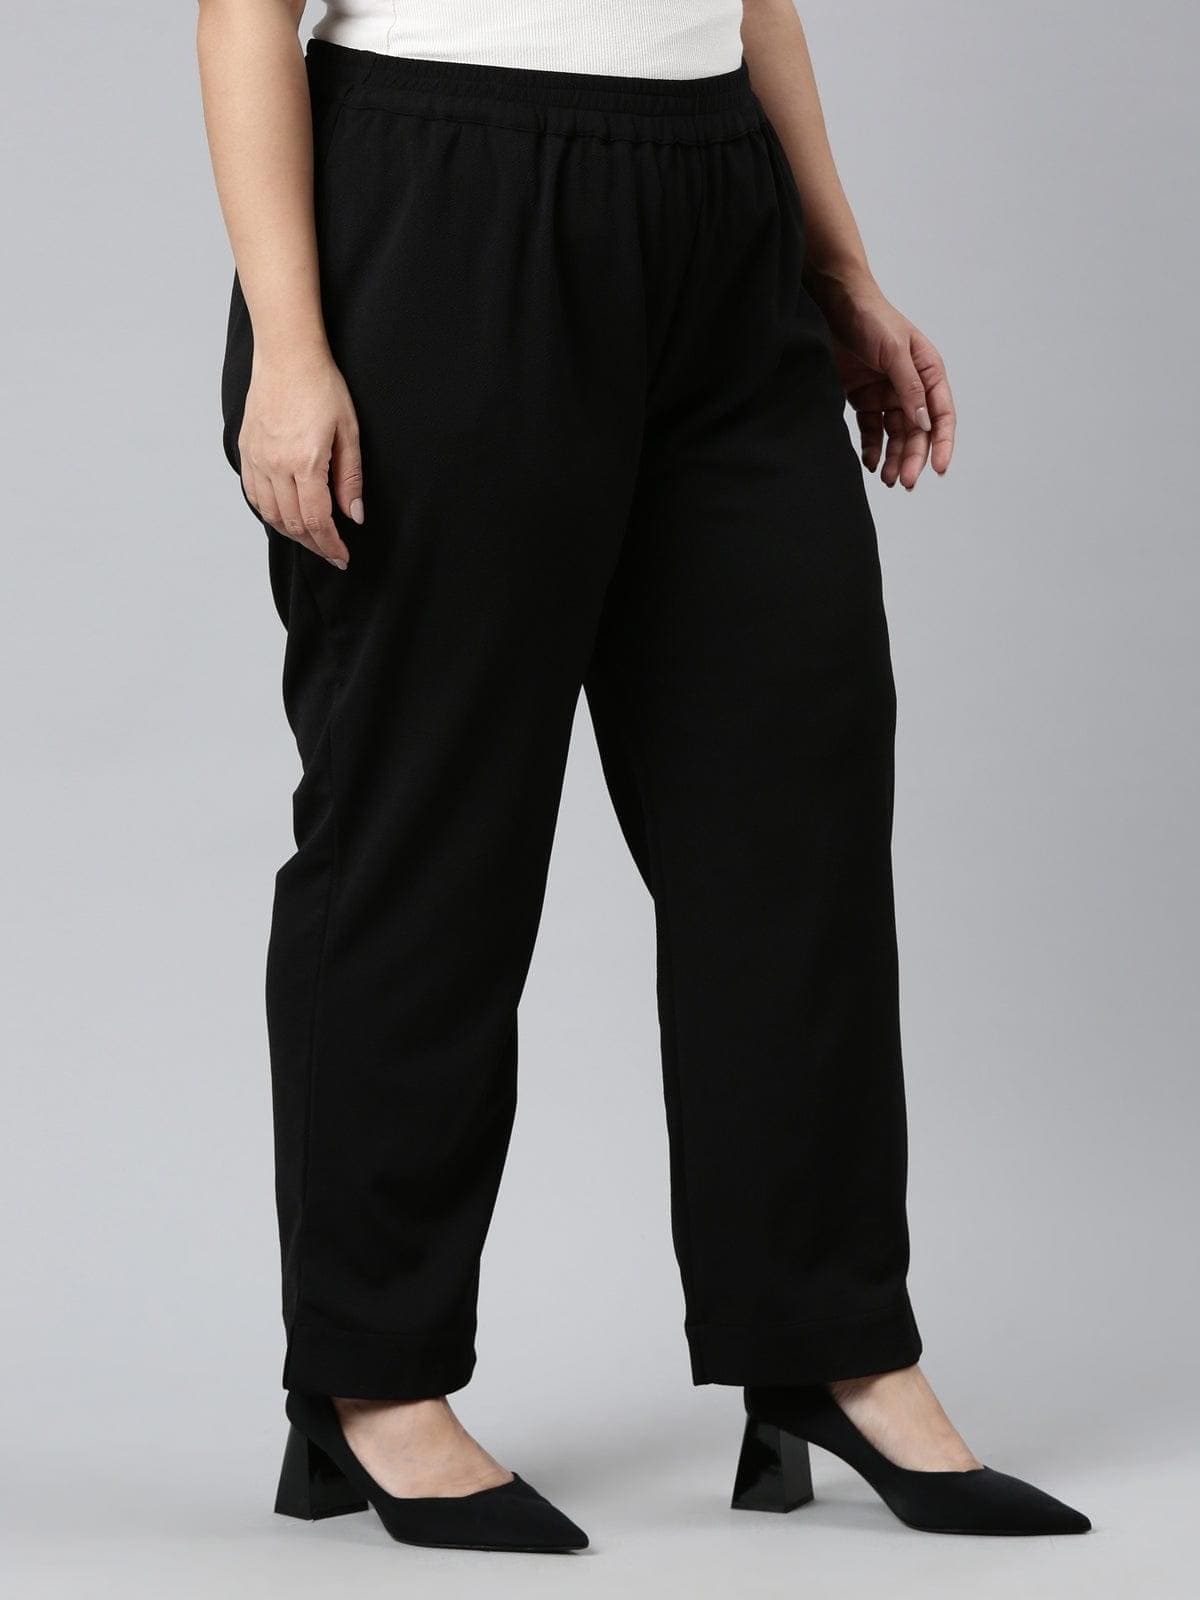 buy palazzo pants for women's and girls TheShaili online India at best prices